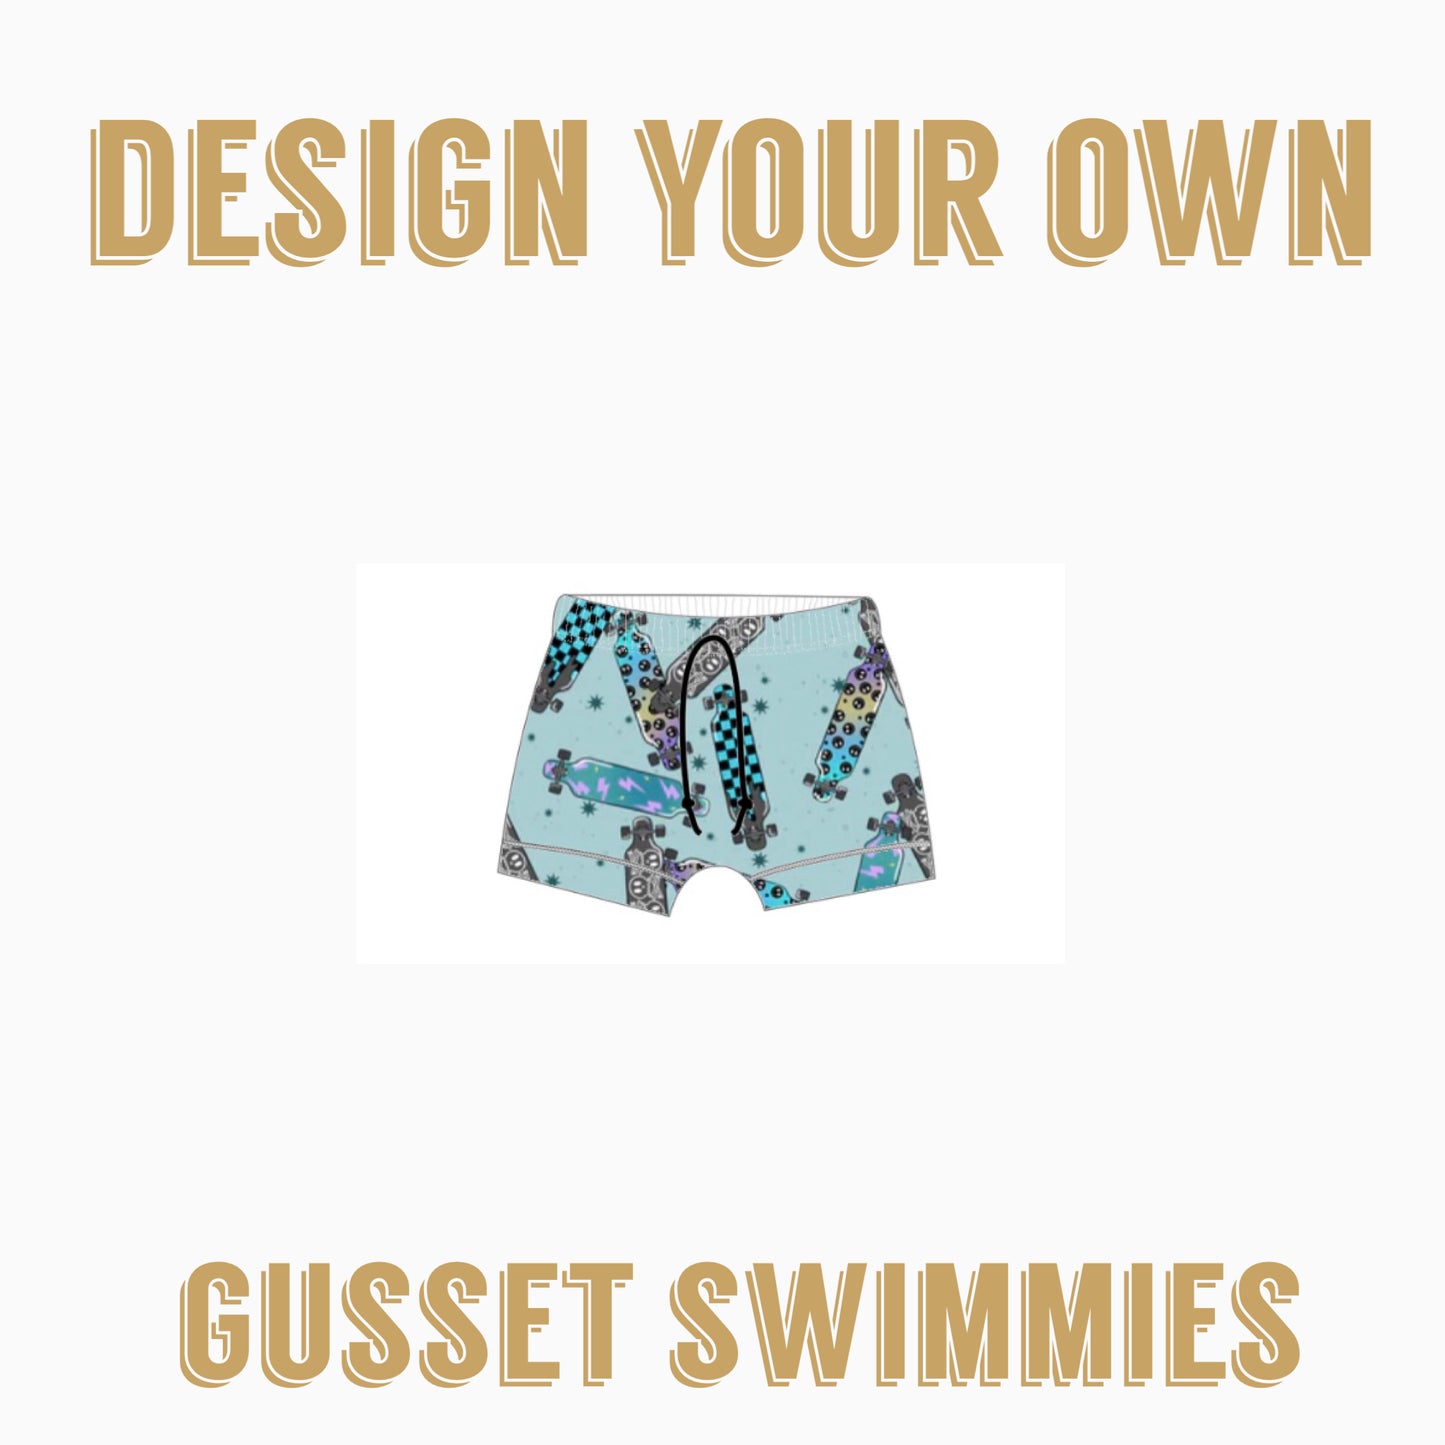 Design Your Own| GUSSET SWIMMIES